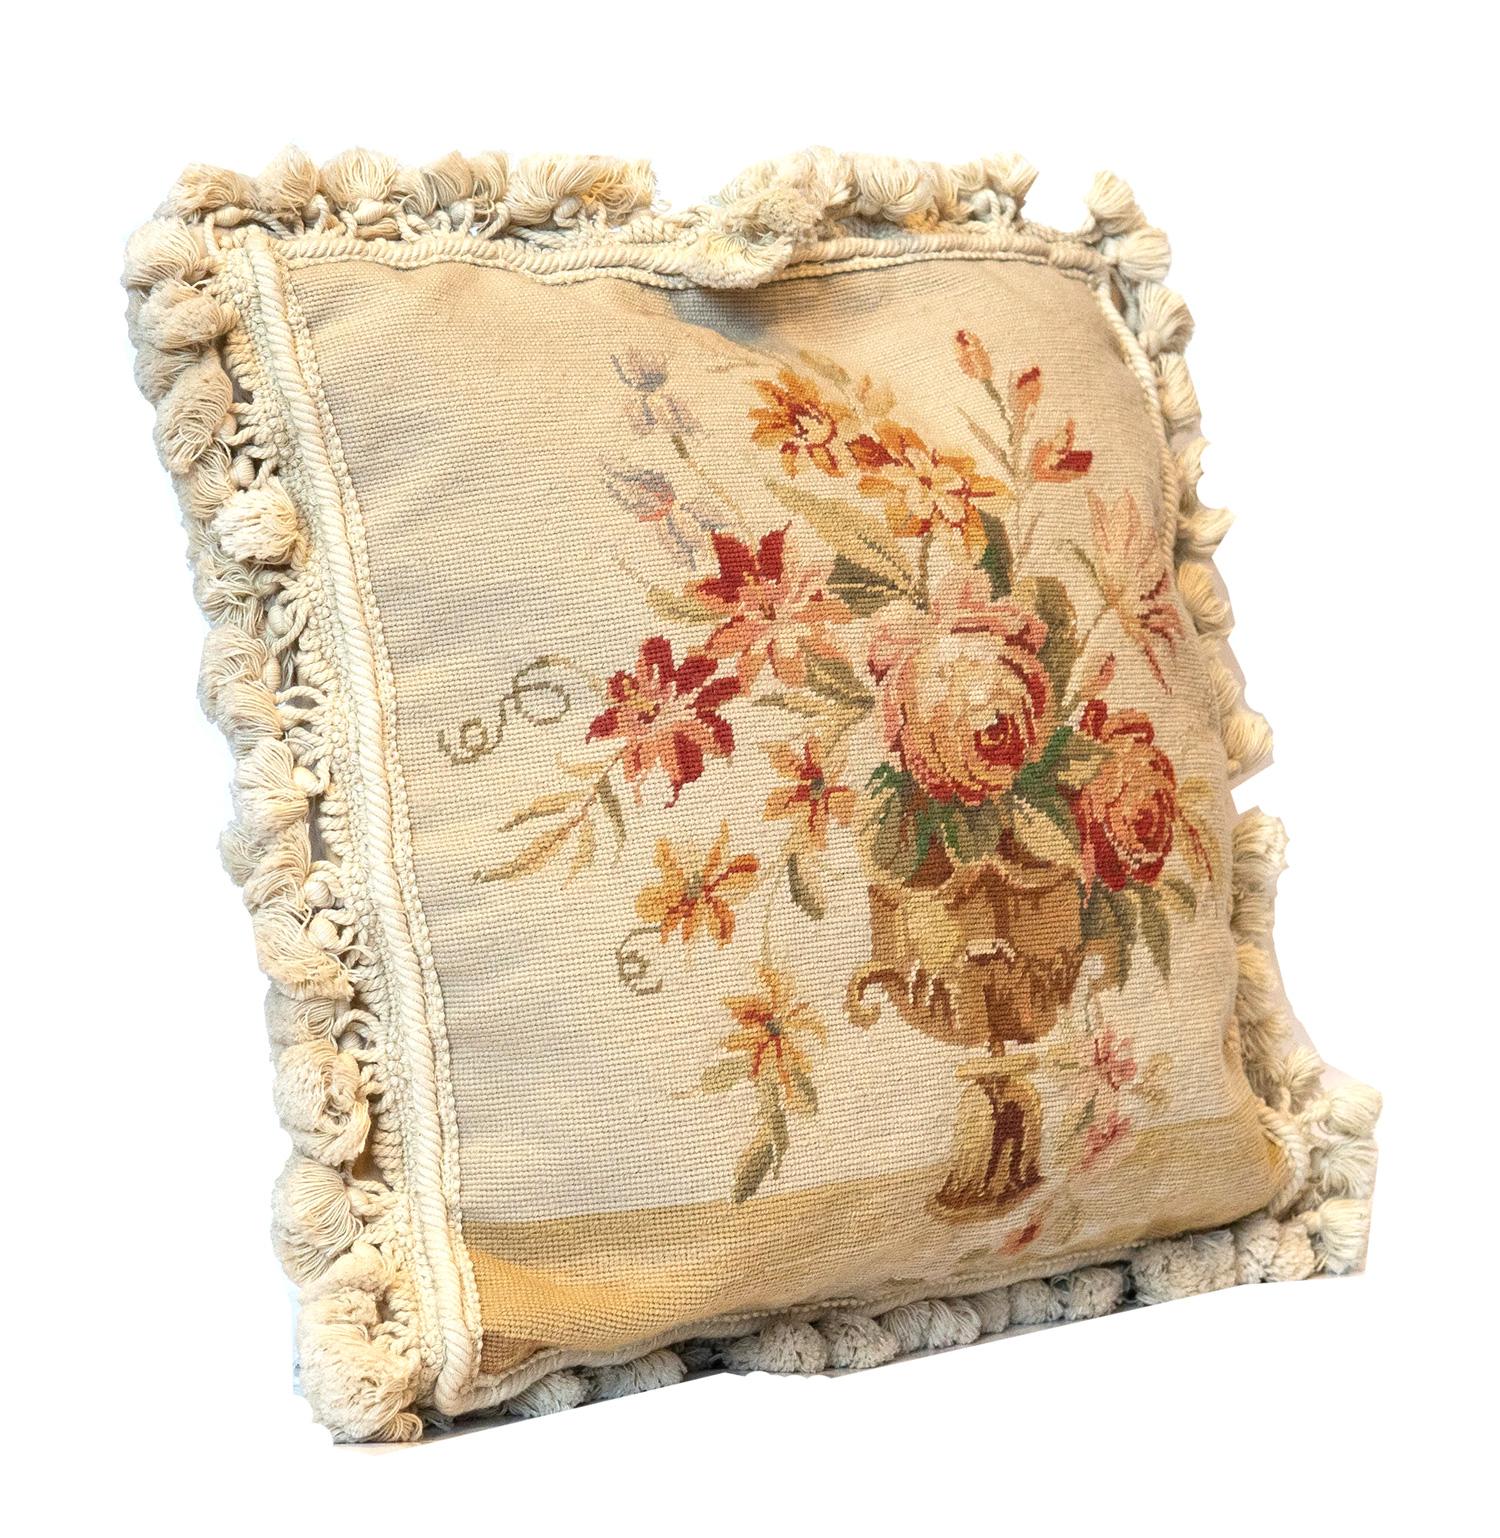 Antique rug vintage pillowcase zipper cushion handmade needlepoint pillow cover, view one of the most comprehensive collections of the decorative pillow, handmade throw pillow cover of traditional floral rugs, needlepoint cushions cover and